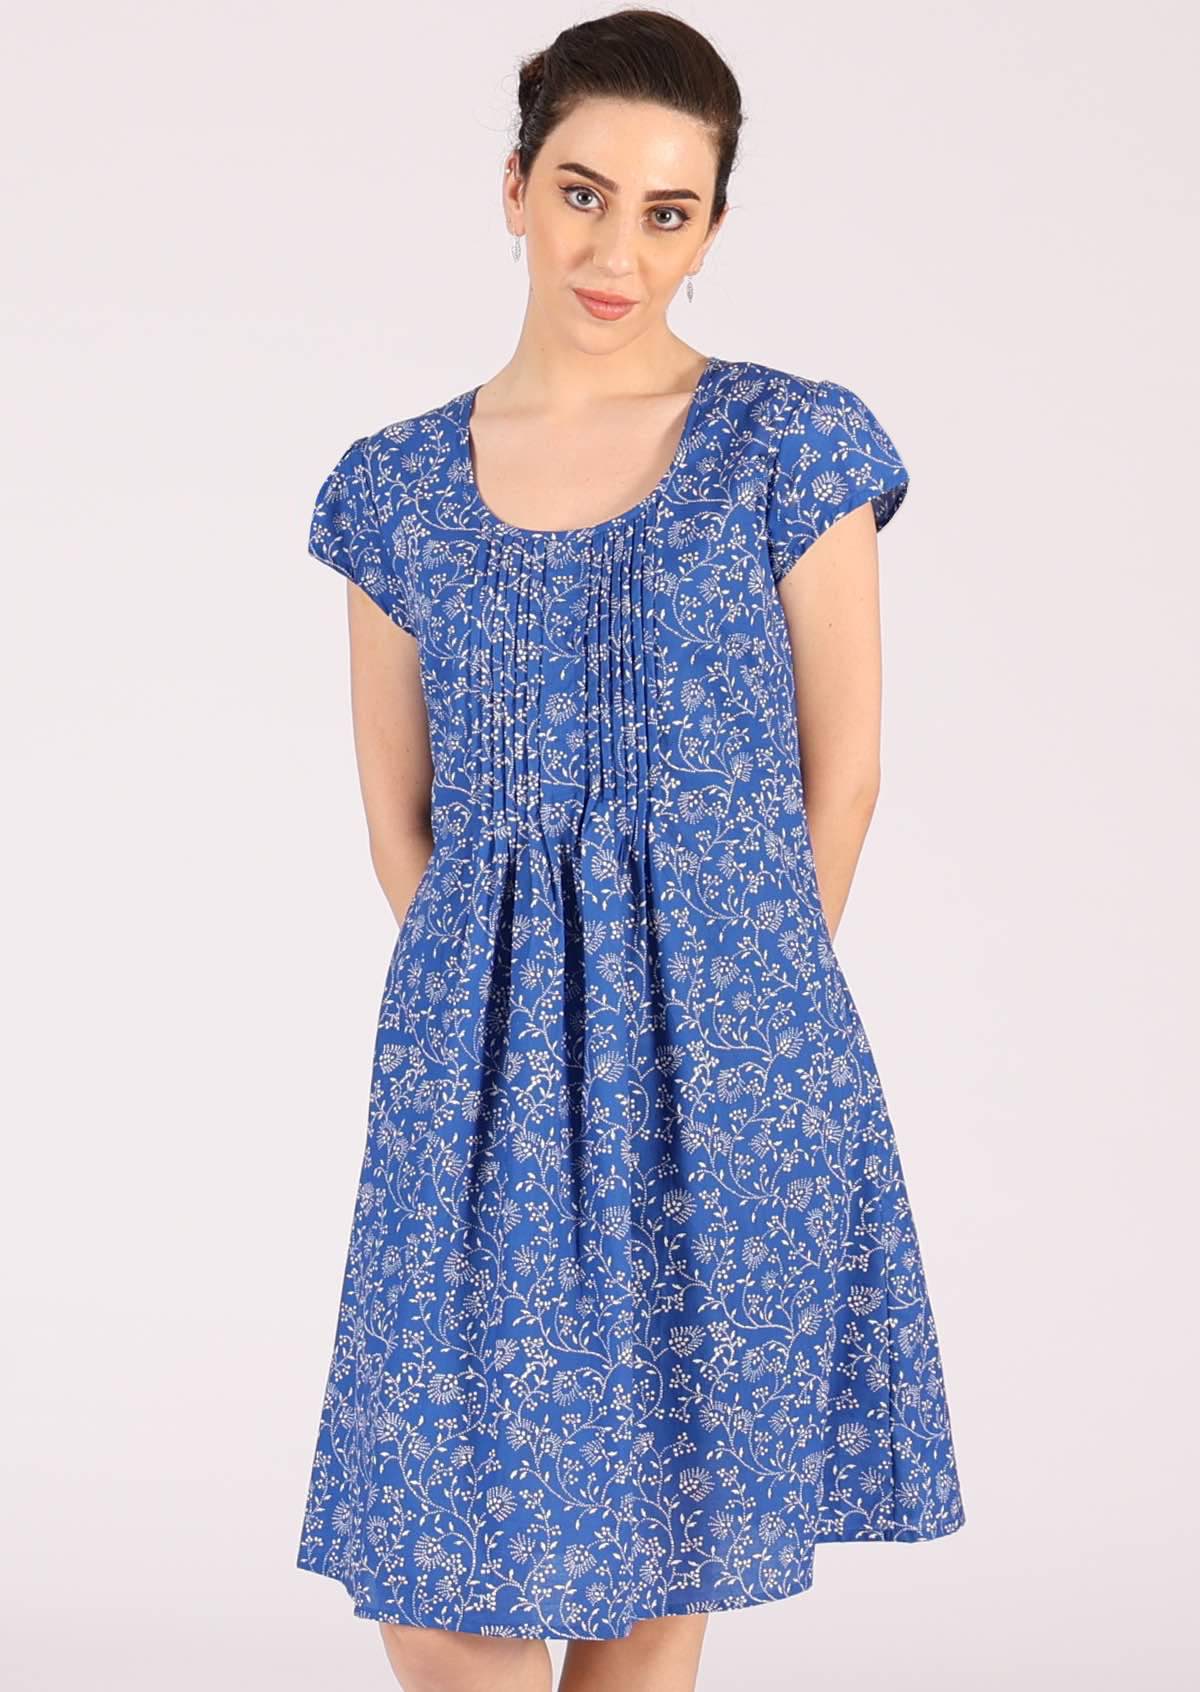 Small pleats across the bodice of this sweet blue base cotton dress